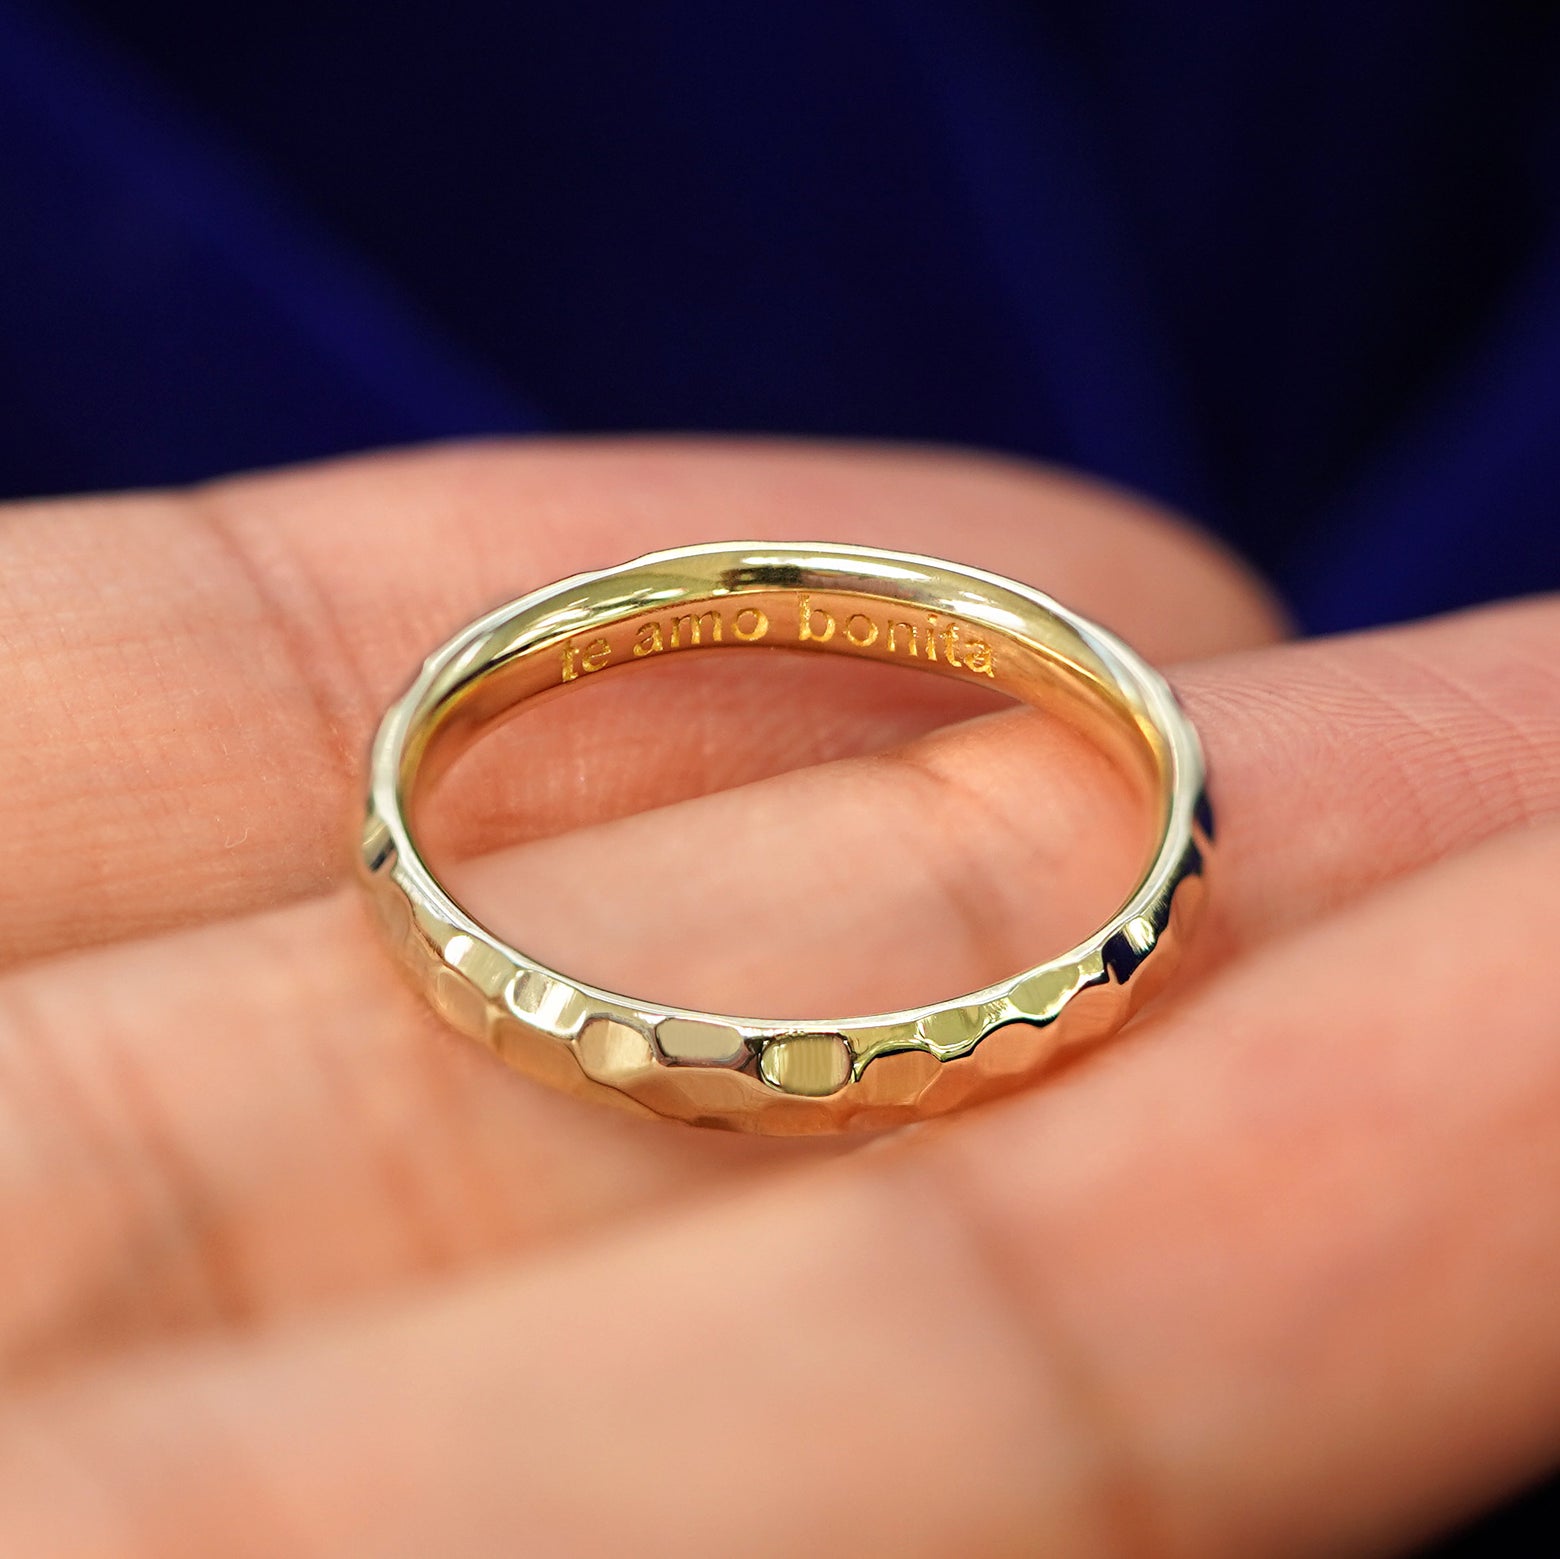 A Curvy Hammered Band in a model's hand tilted to show engraving on the inside of the band that reads Te Amo Bonita